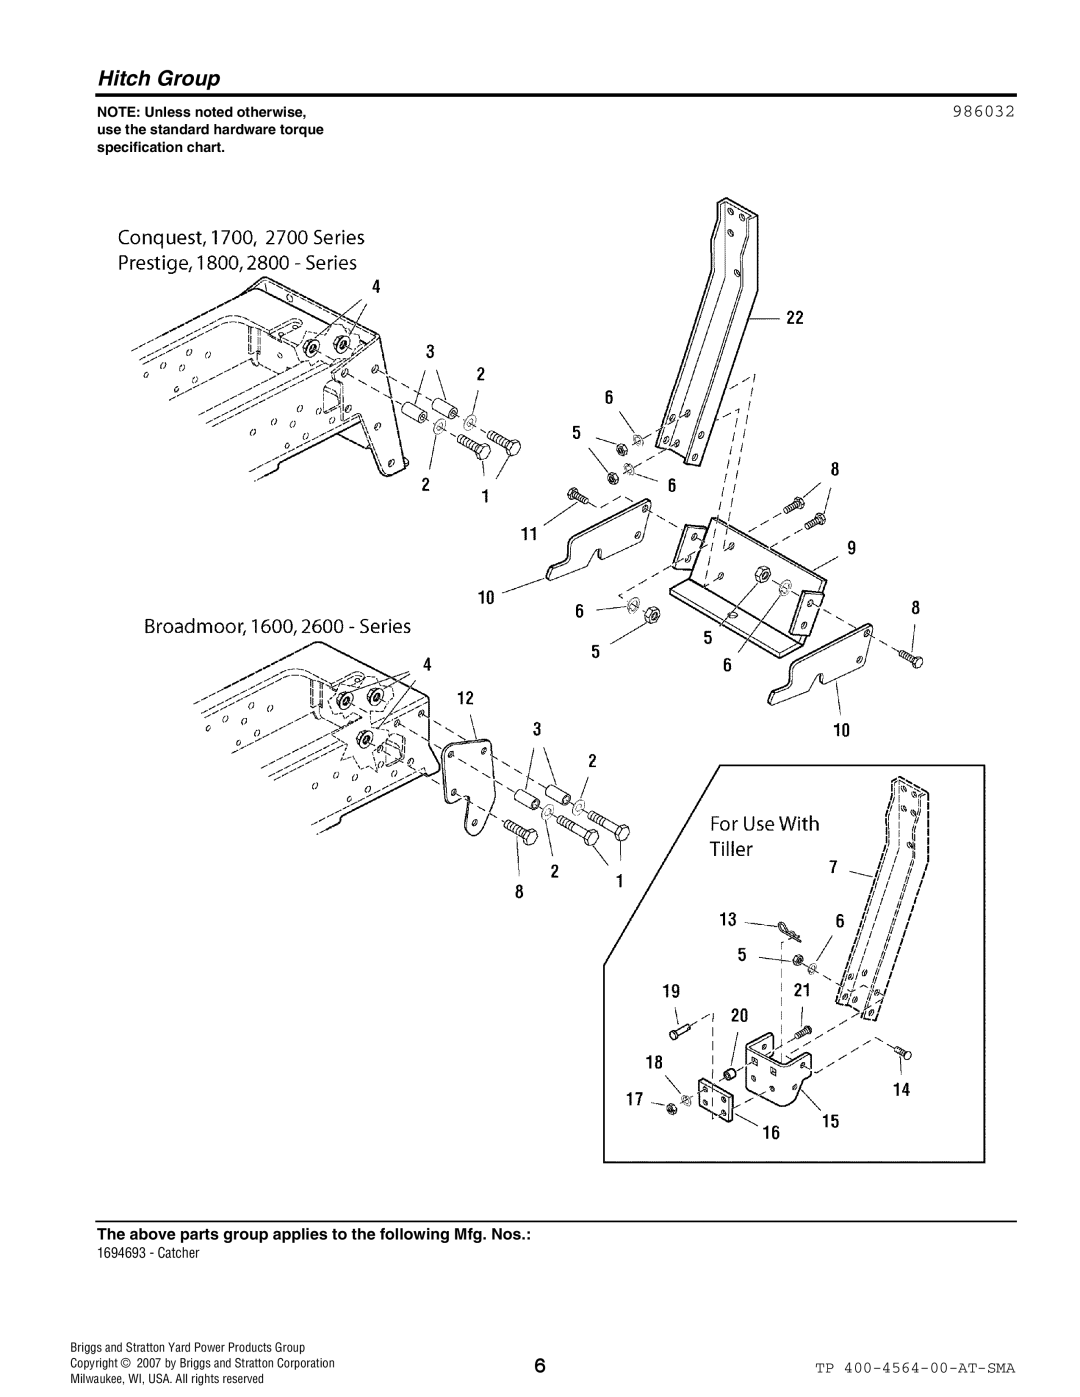 Snapper 4564 manual Hitch Group, 986032, NOTE Unless noted otherwise, Briggs and Stratton Yard Power Products Group 